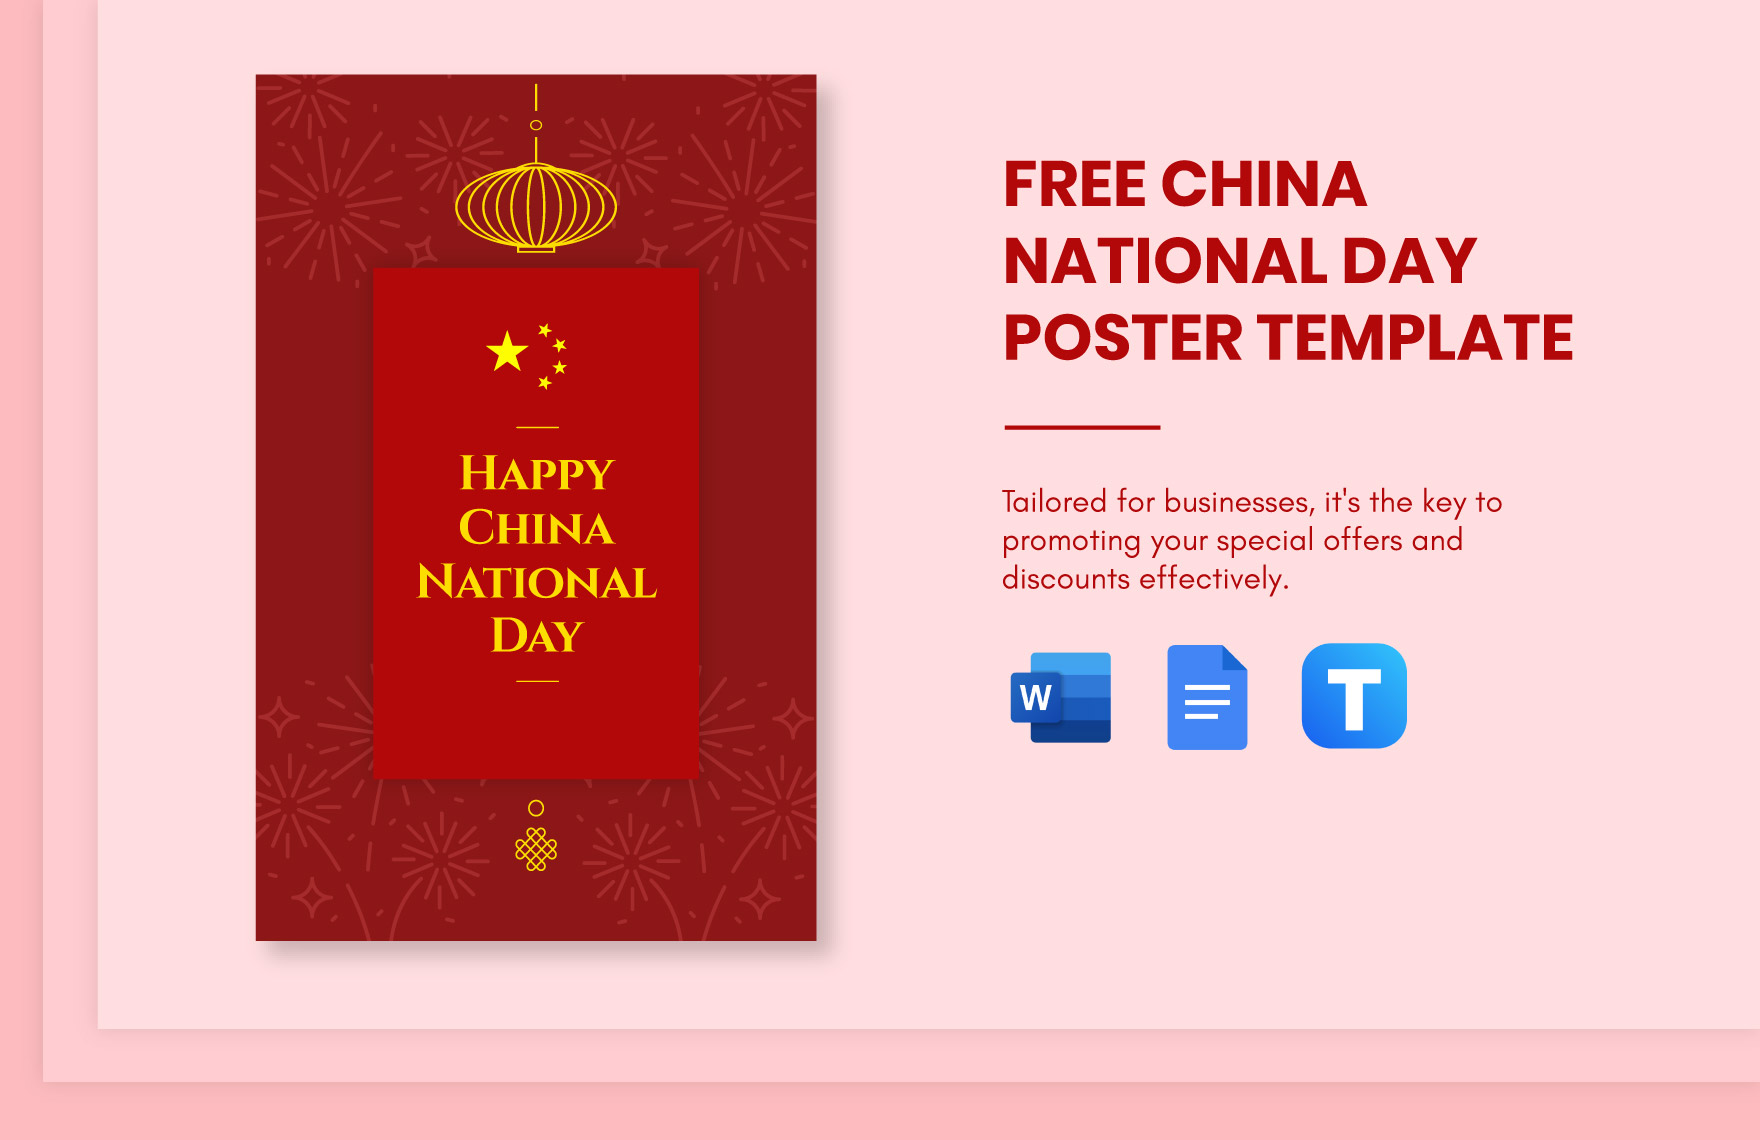 Free China National Day Poster Template in Word, Google Docs